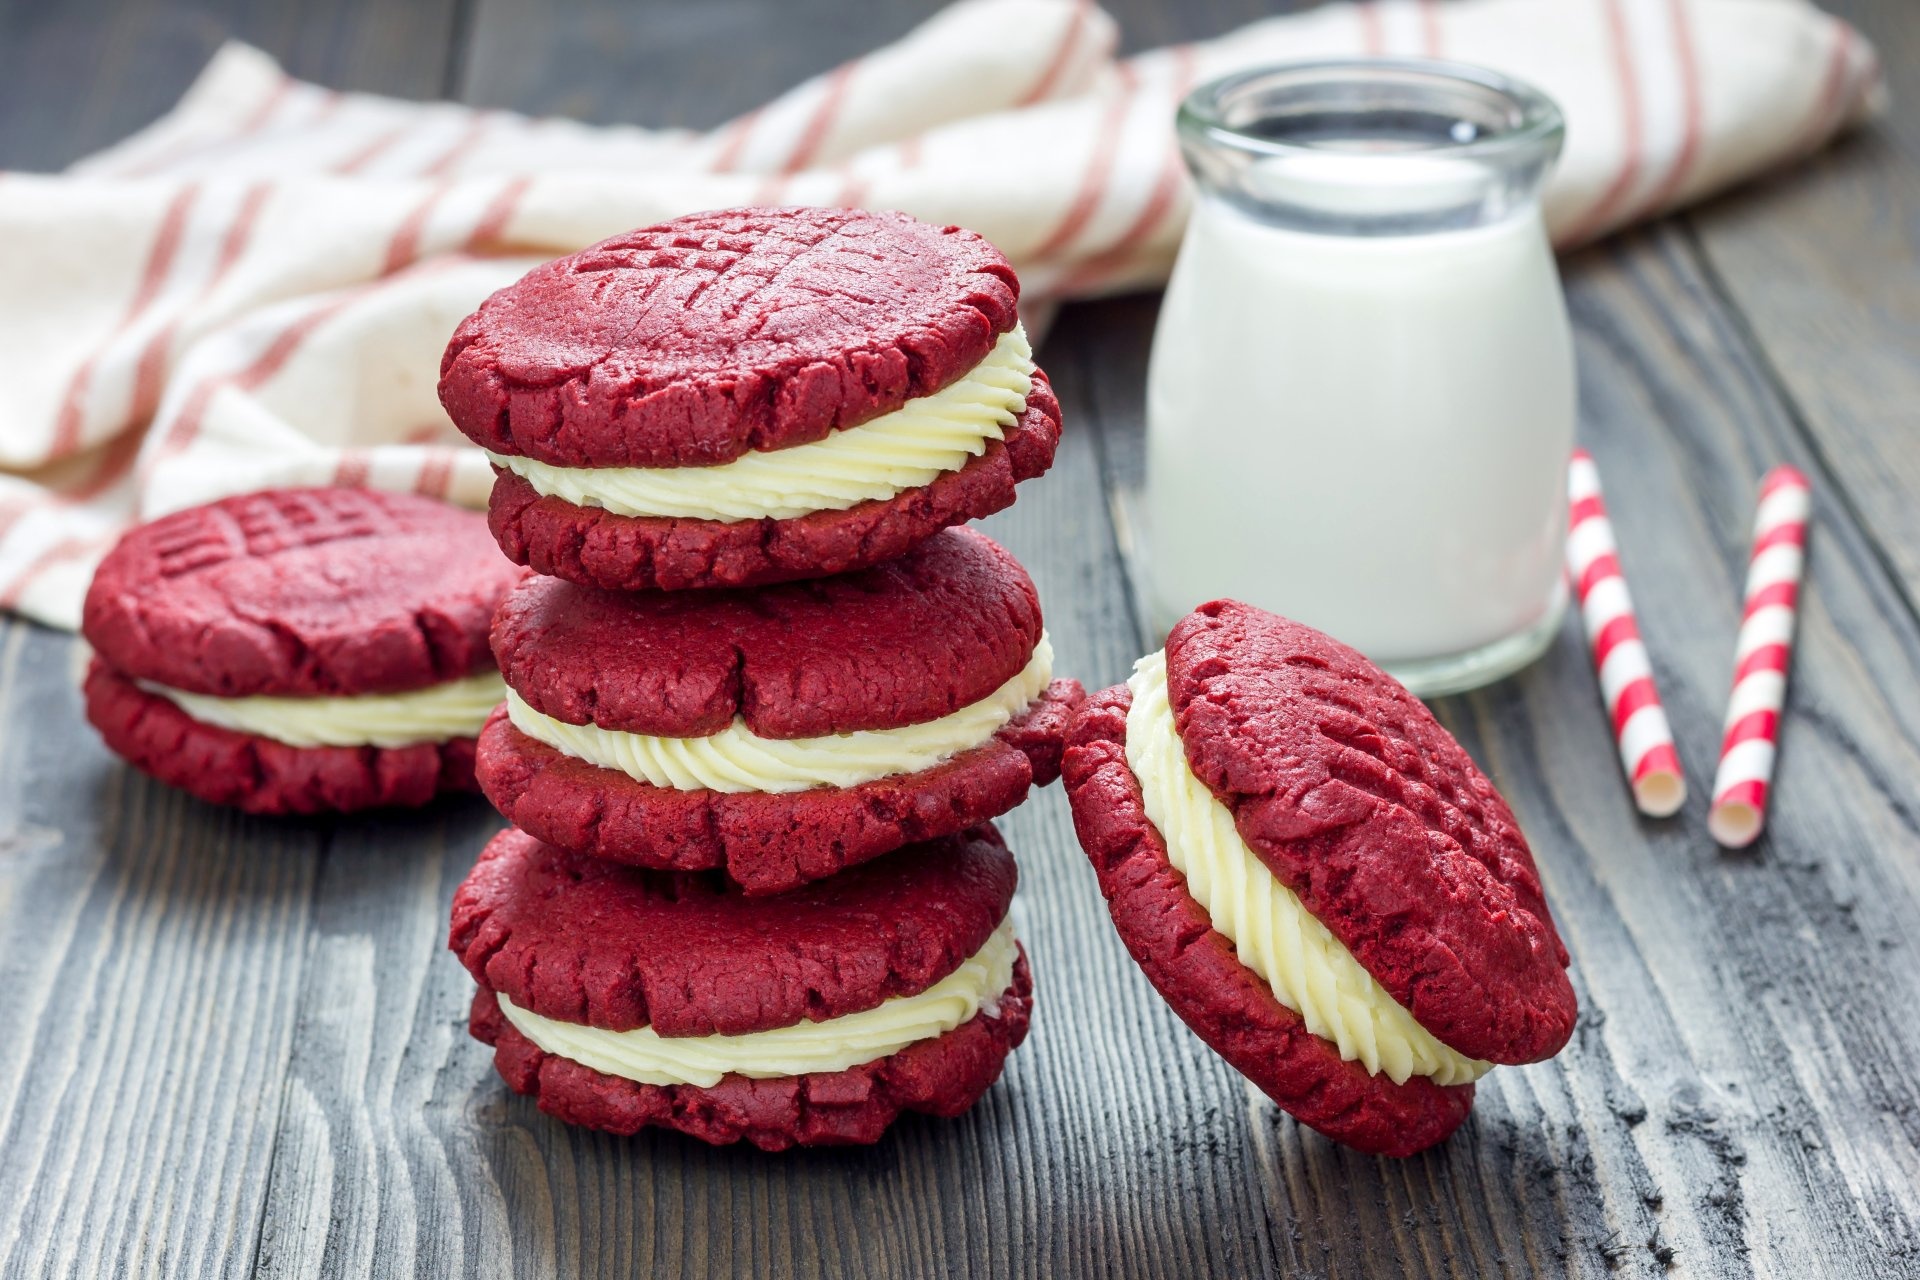 Biscuit: Red Velvet Whoopie Pies, Two little red velvet cakes that are filled with cream cheese filling. 1920x1280 HD Wallpaper.